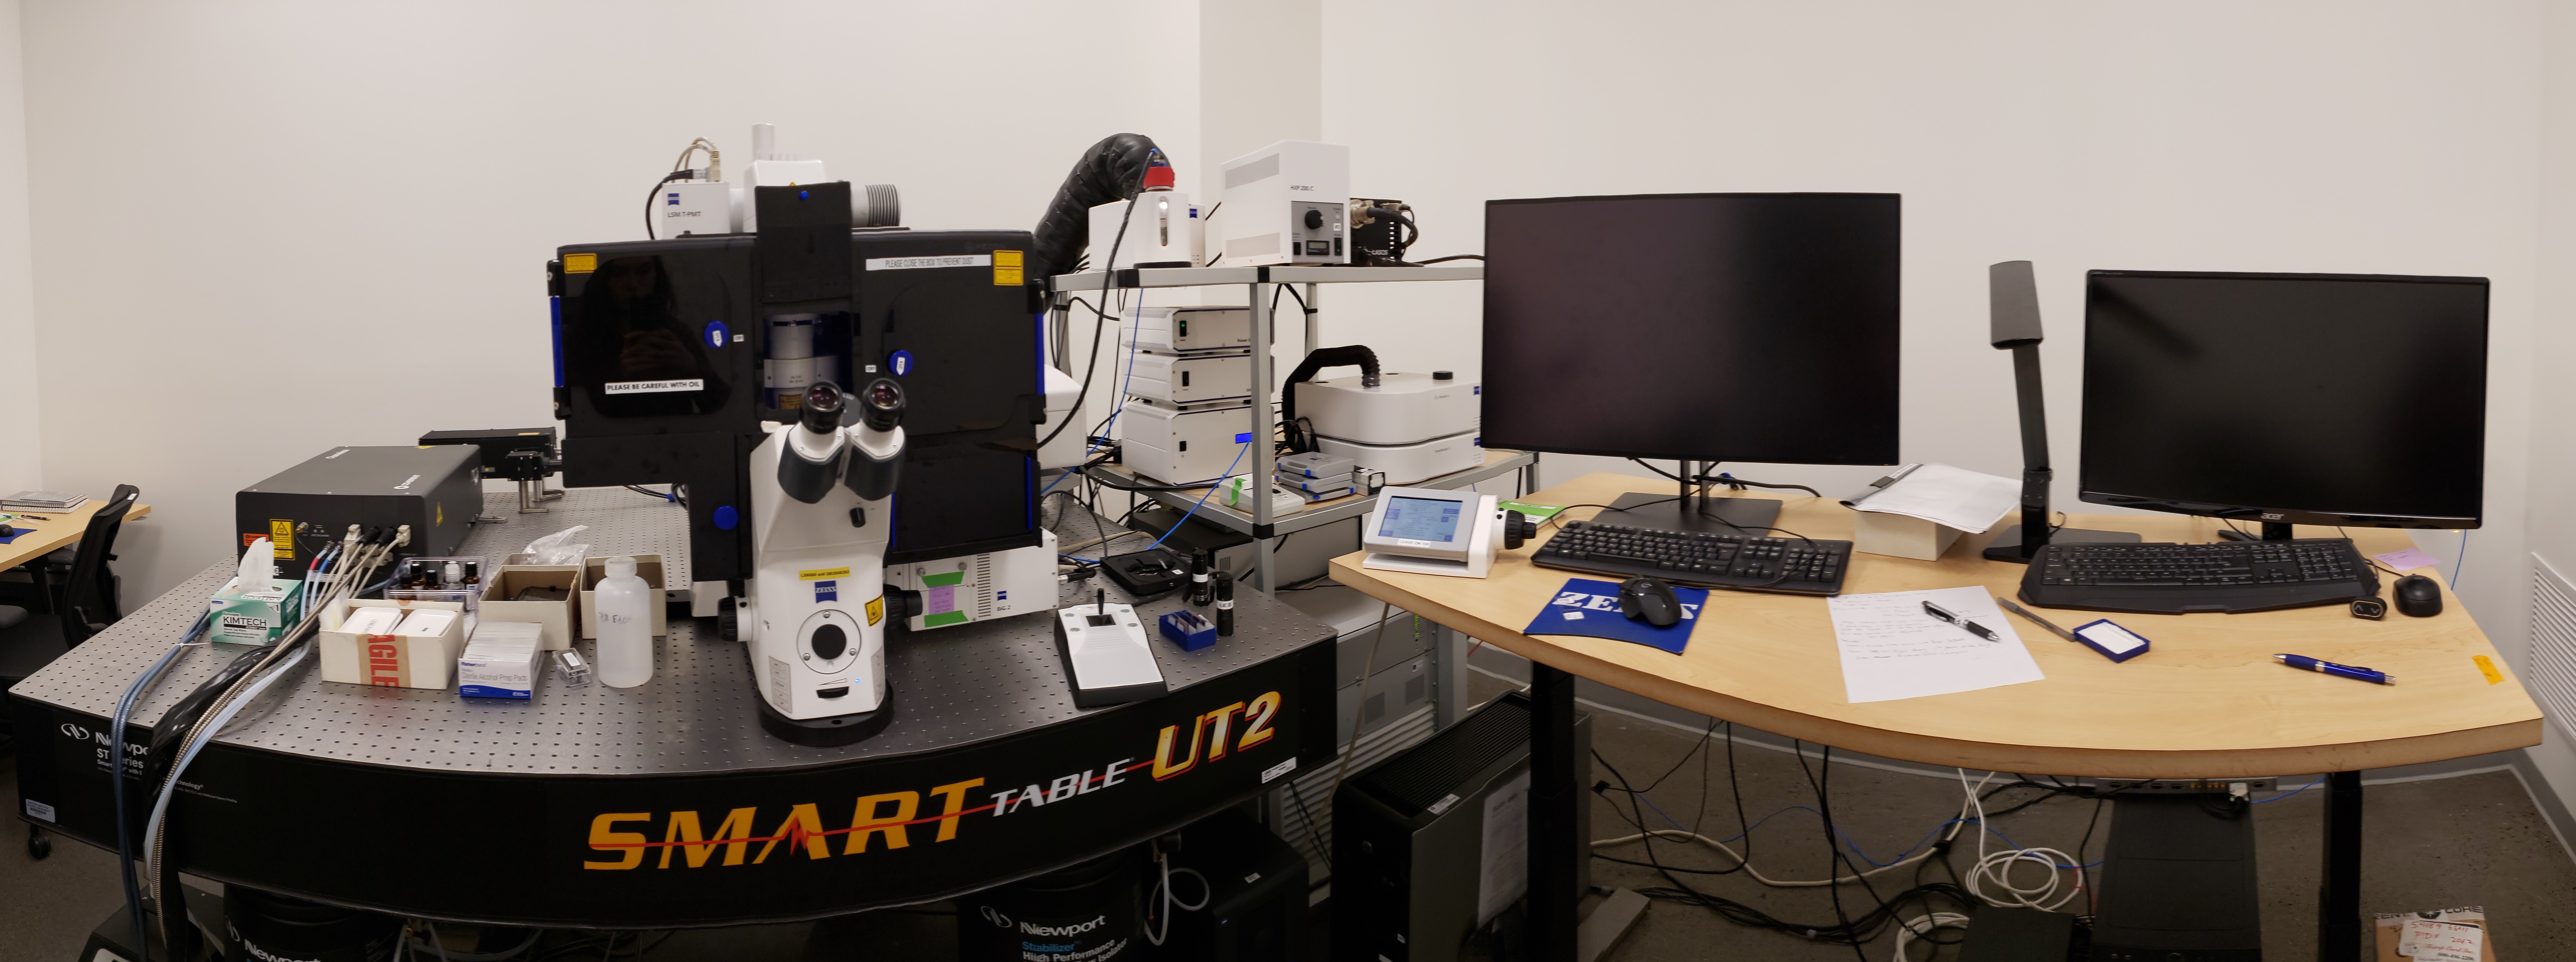 full image of super resolution laser scanning confocal microscope from Ziess